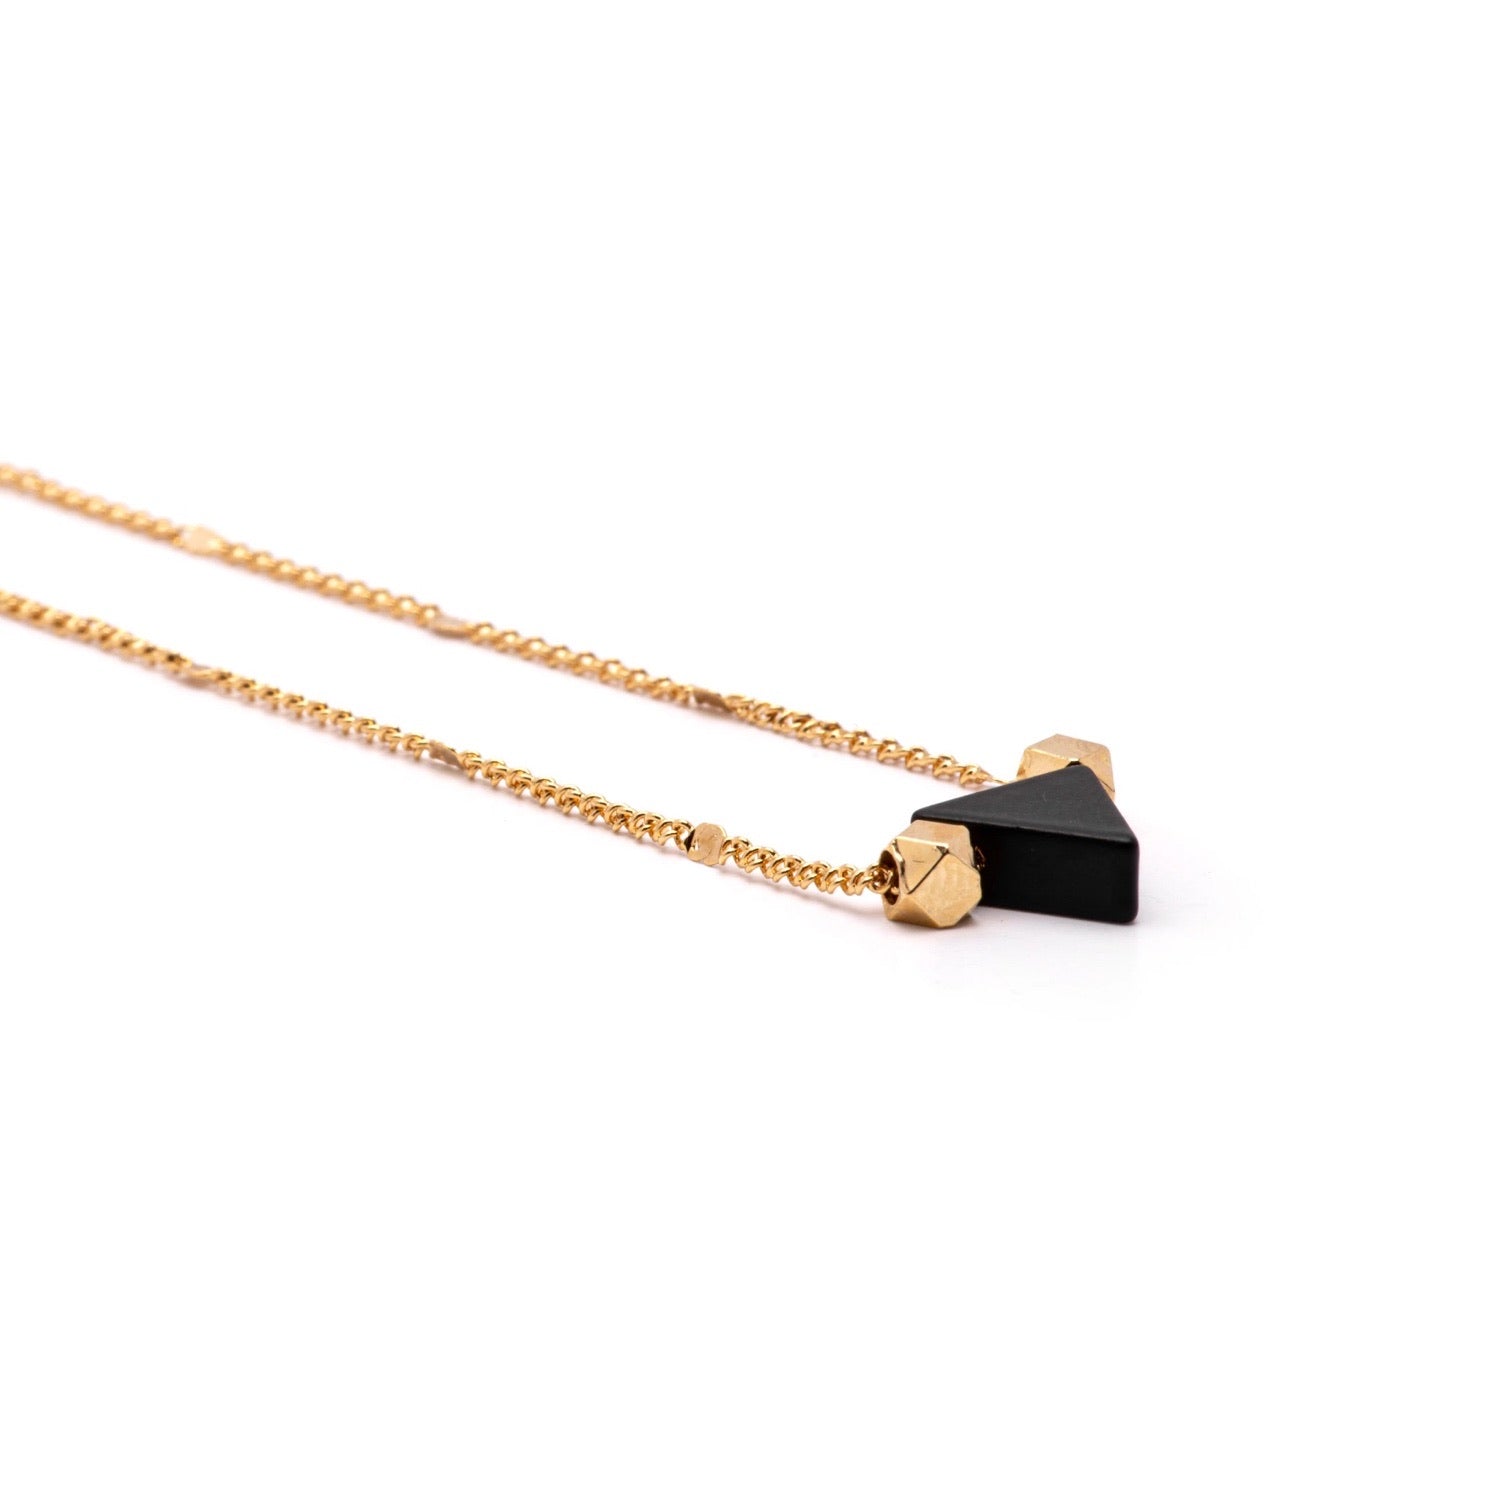 GOLD CENTERED TRIANGLE NECKLACE